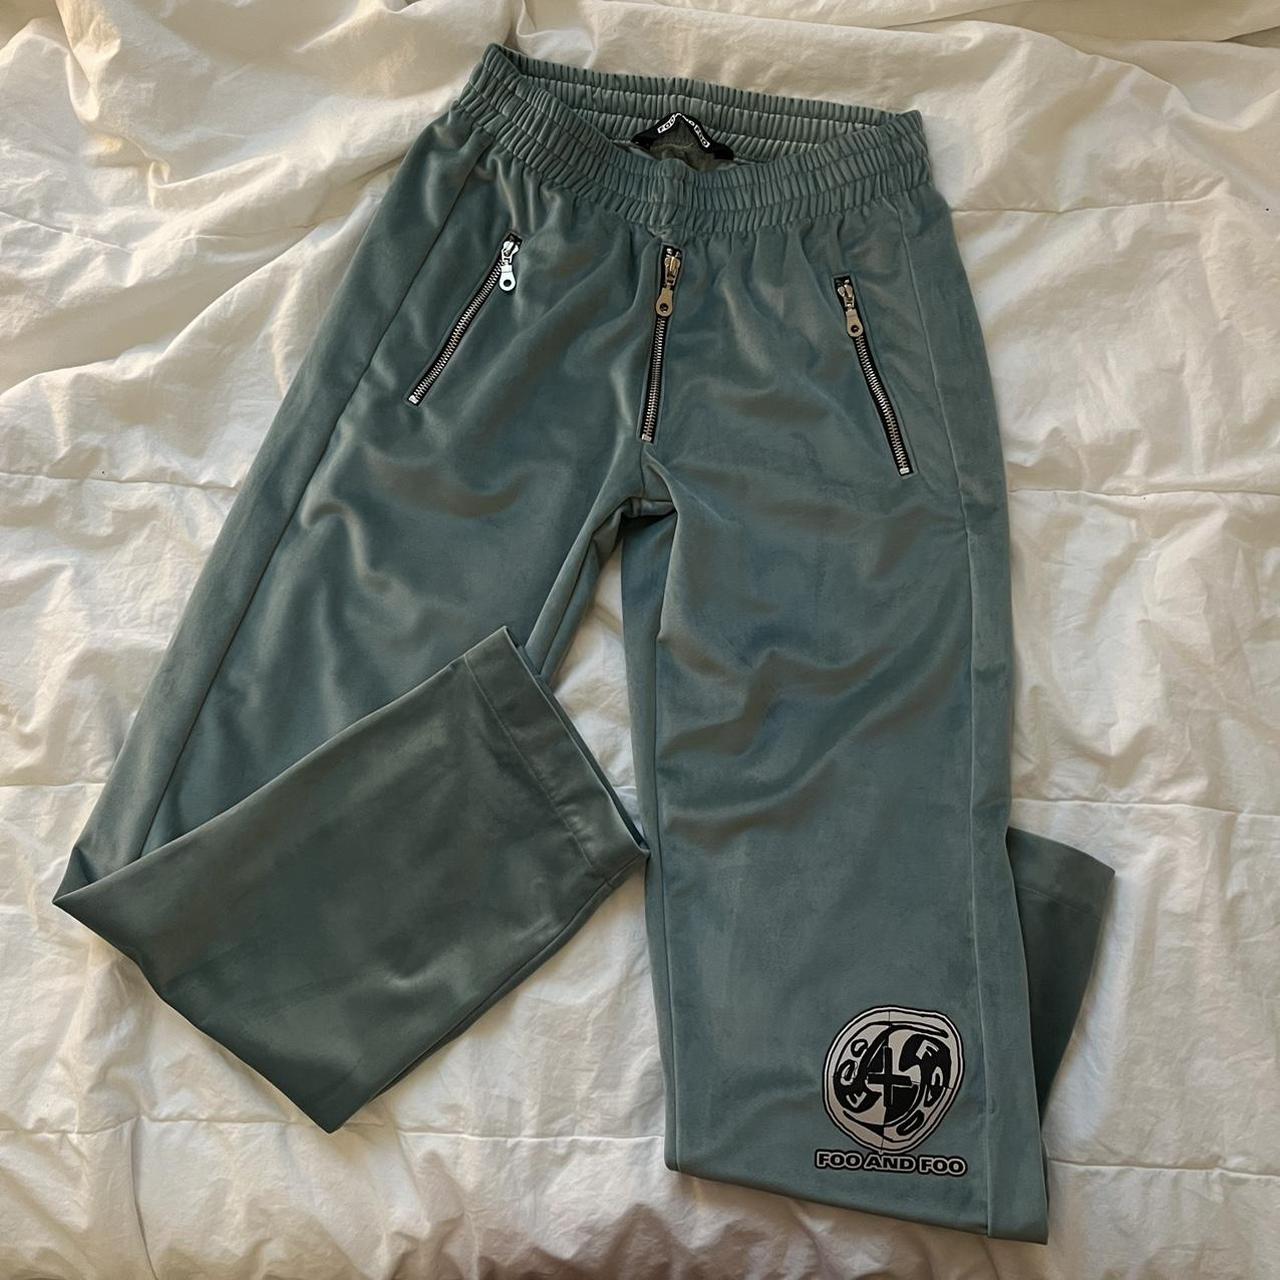 Foo and Foo three zipper turquoise sweats with patch... - Depop